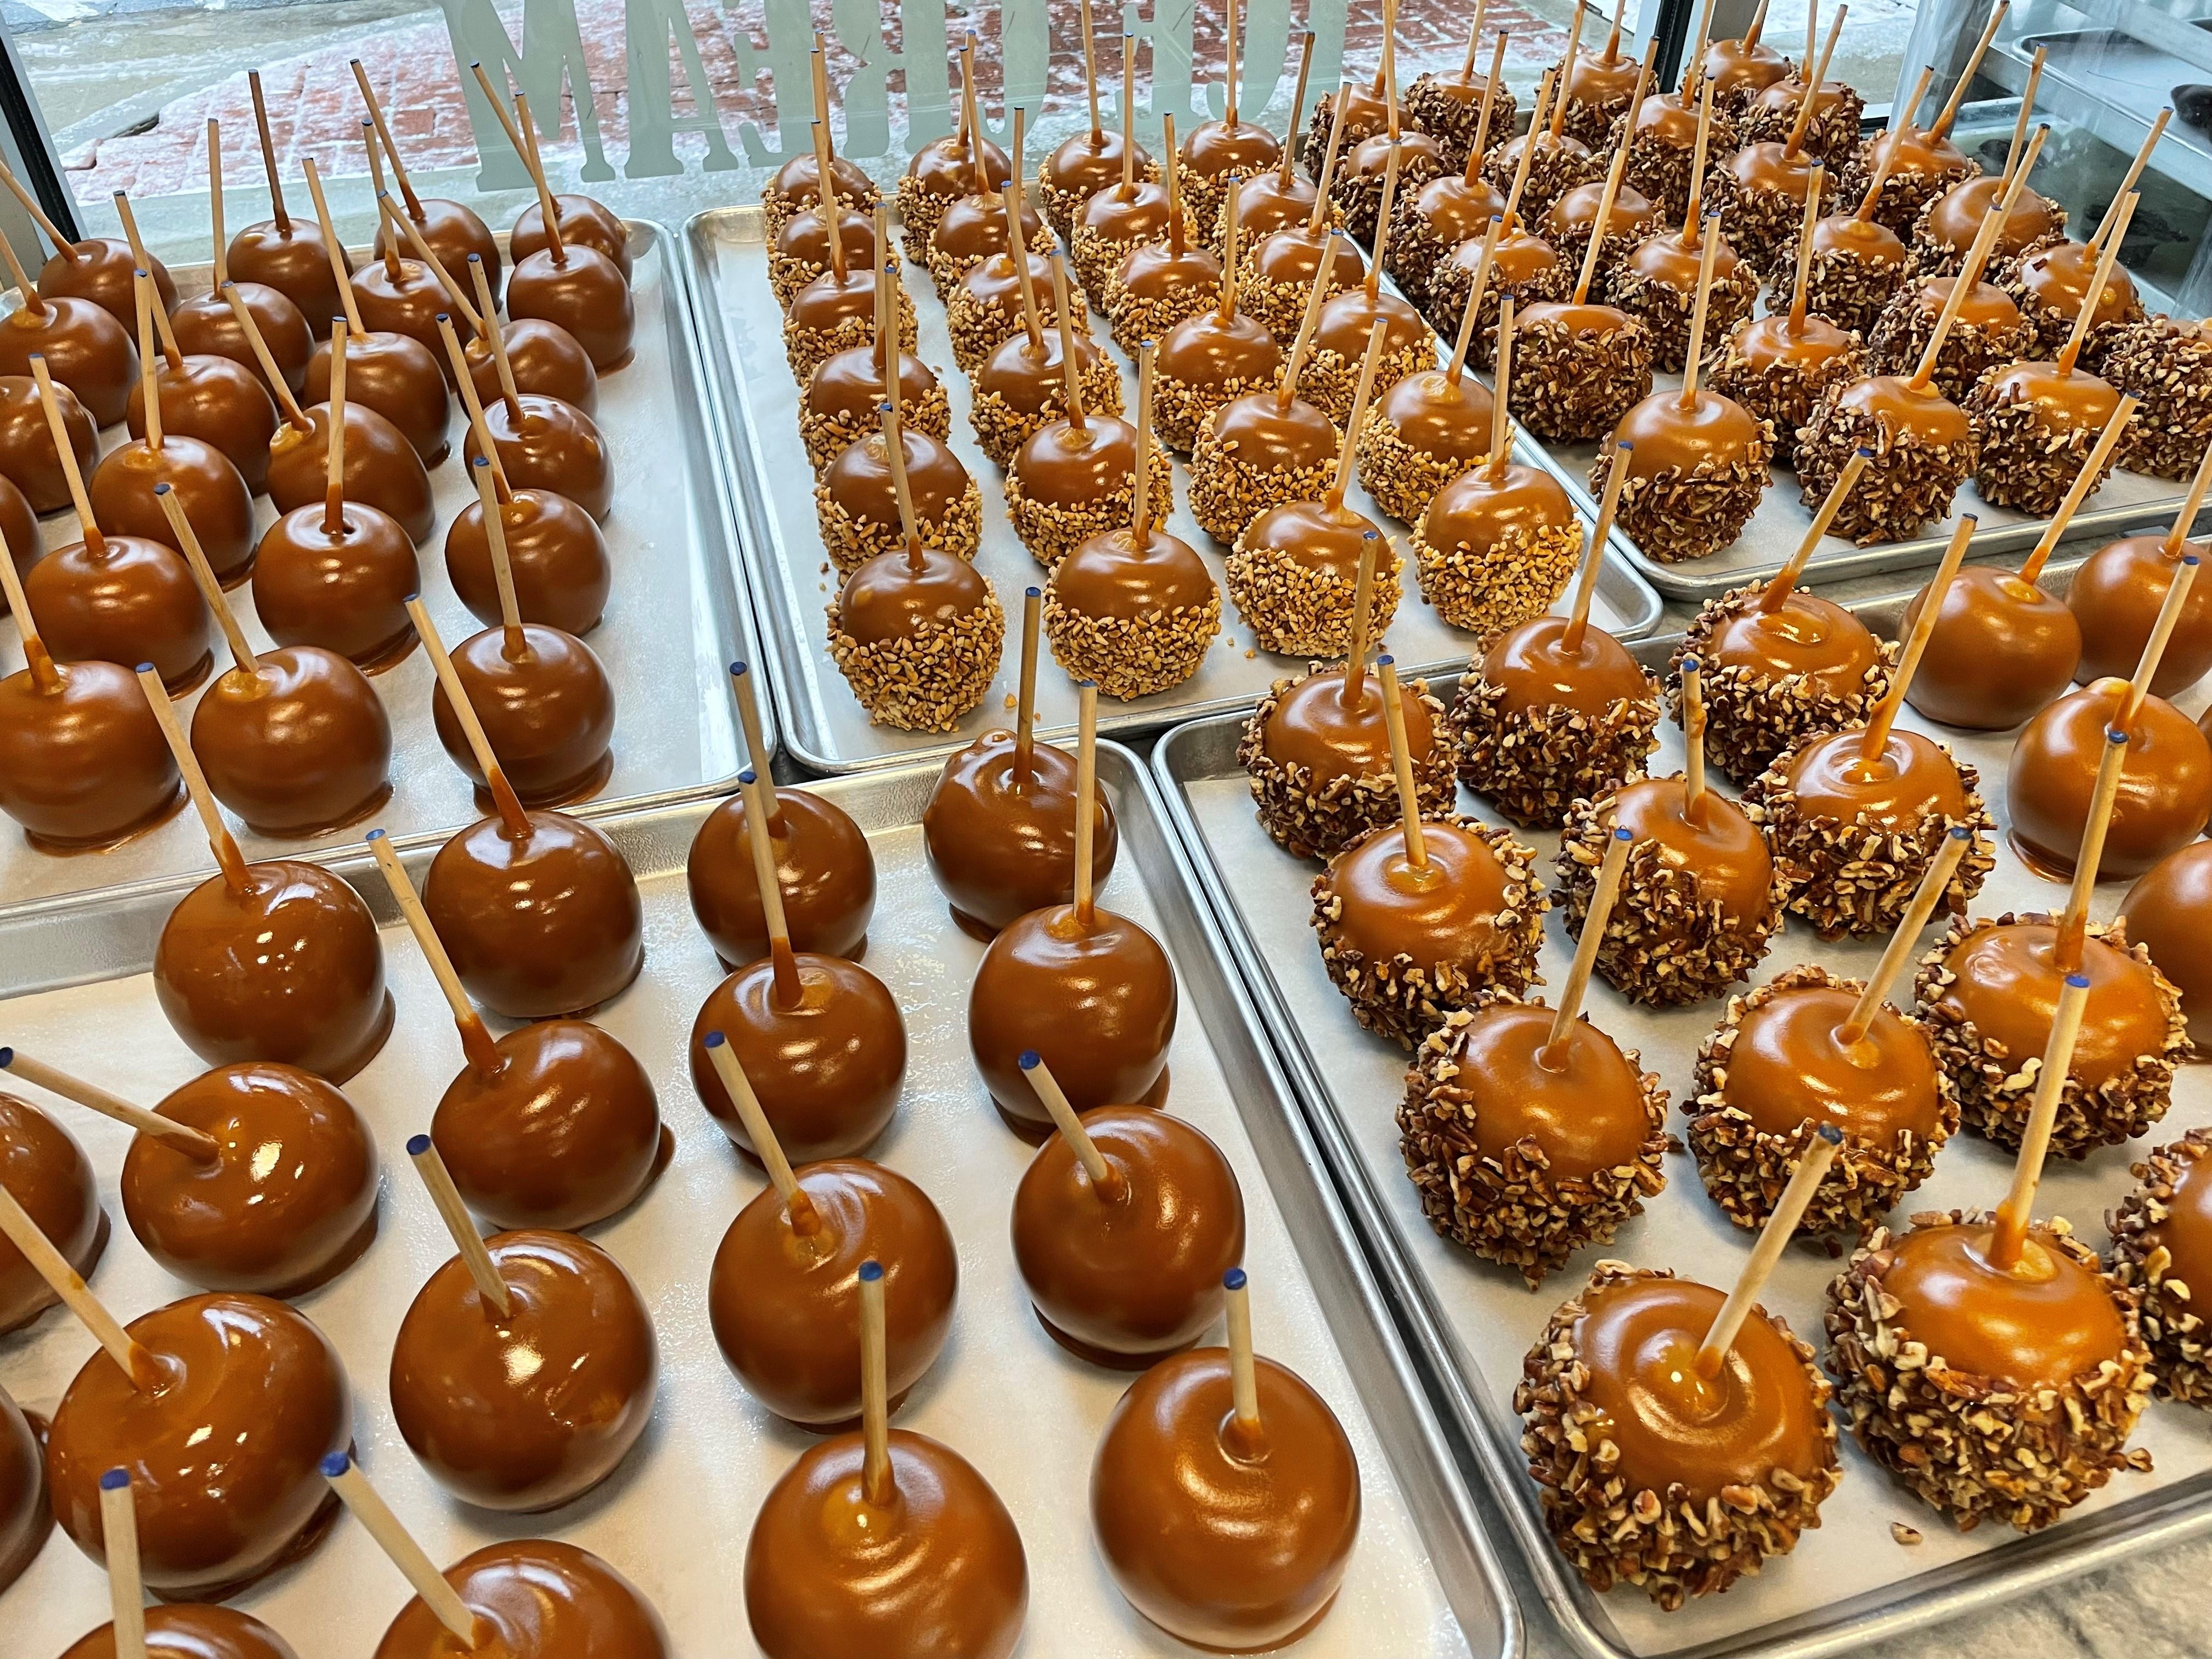 Caramel Apples made fresh in our copper kettle.